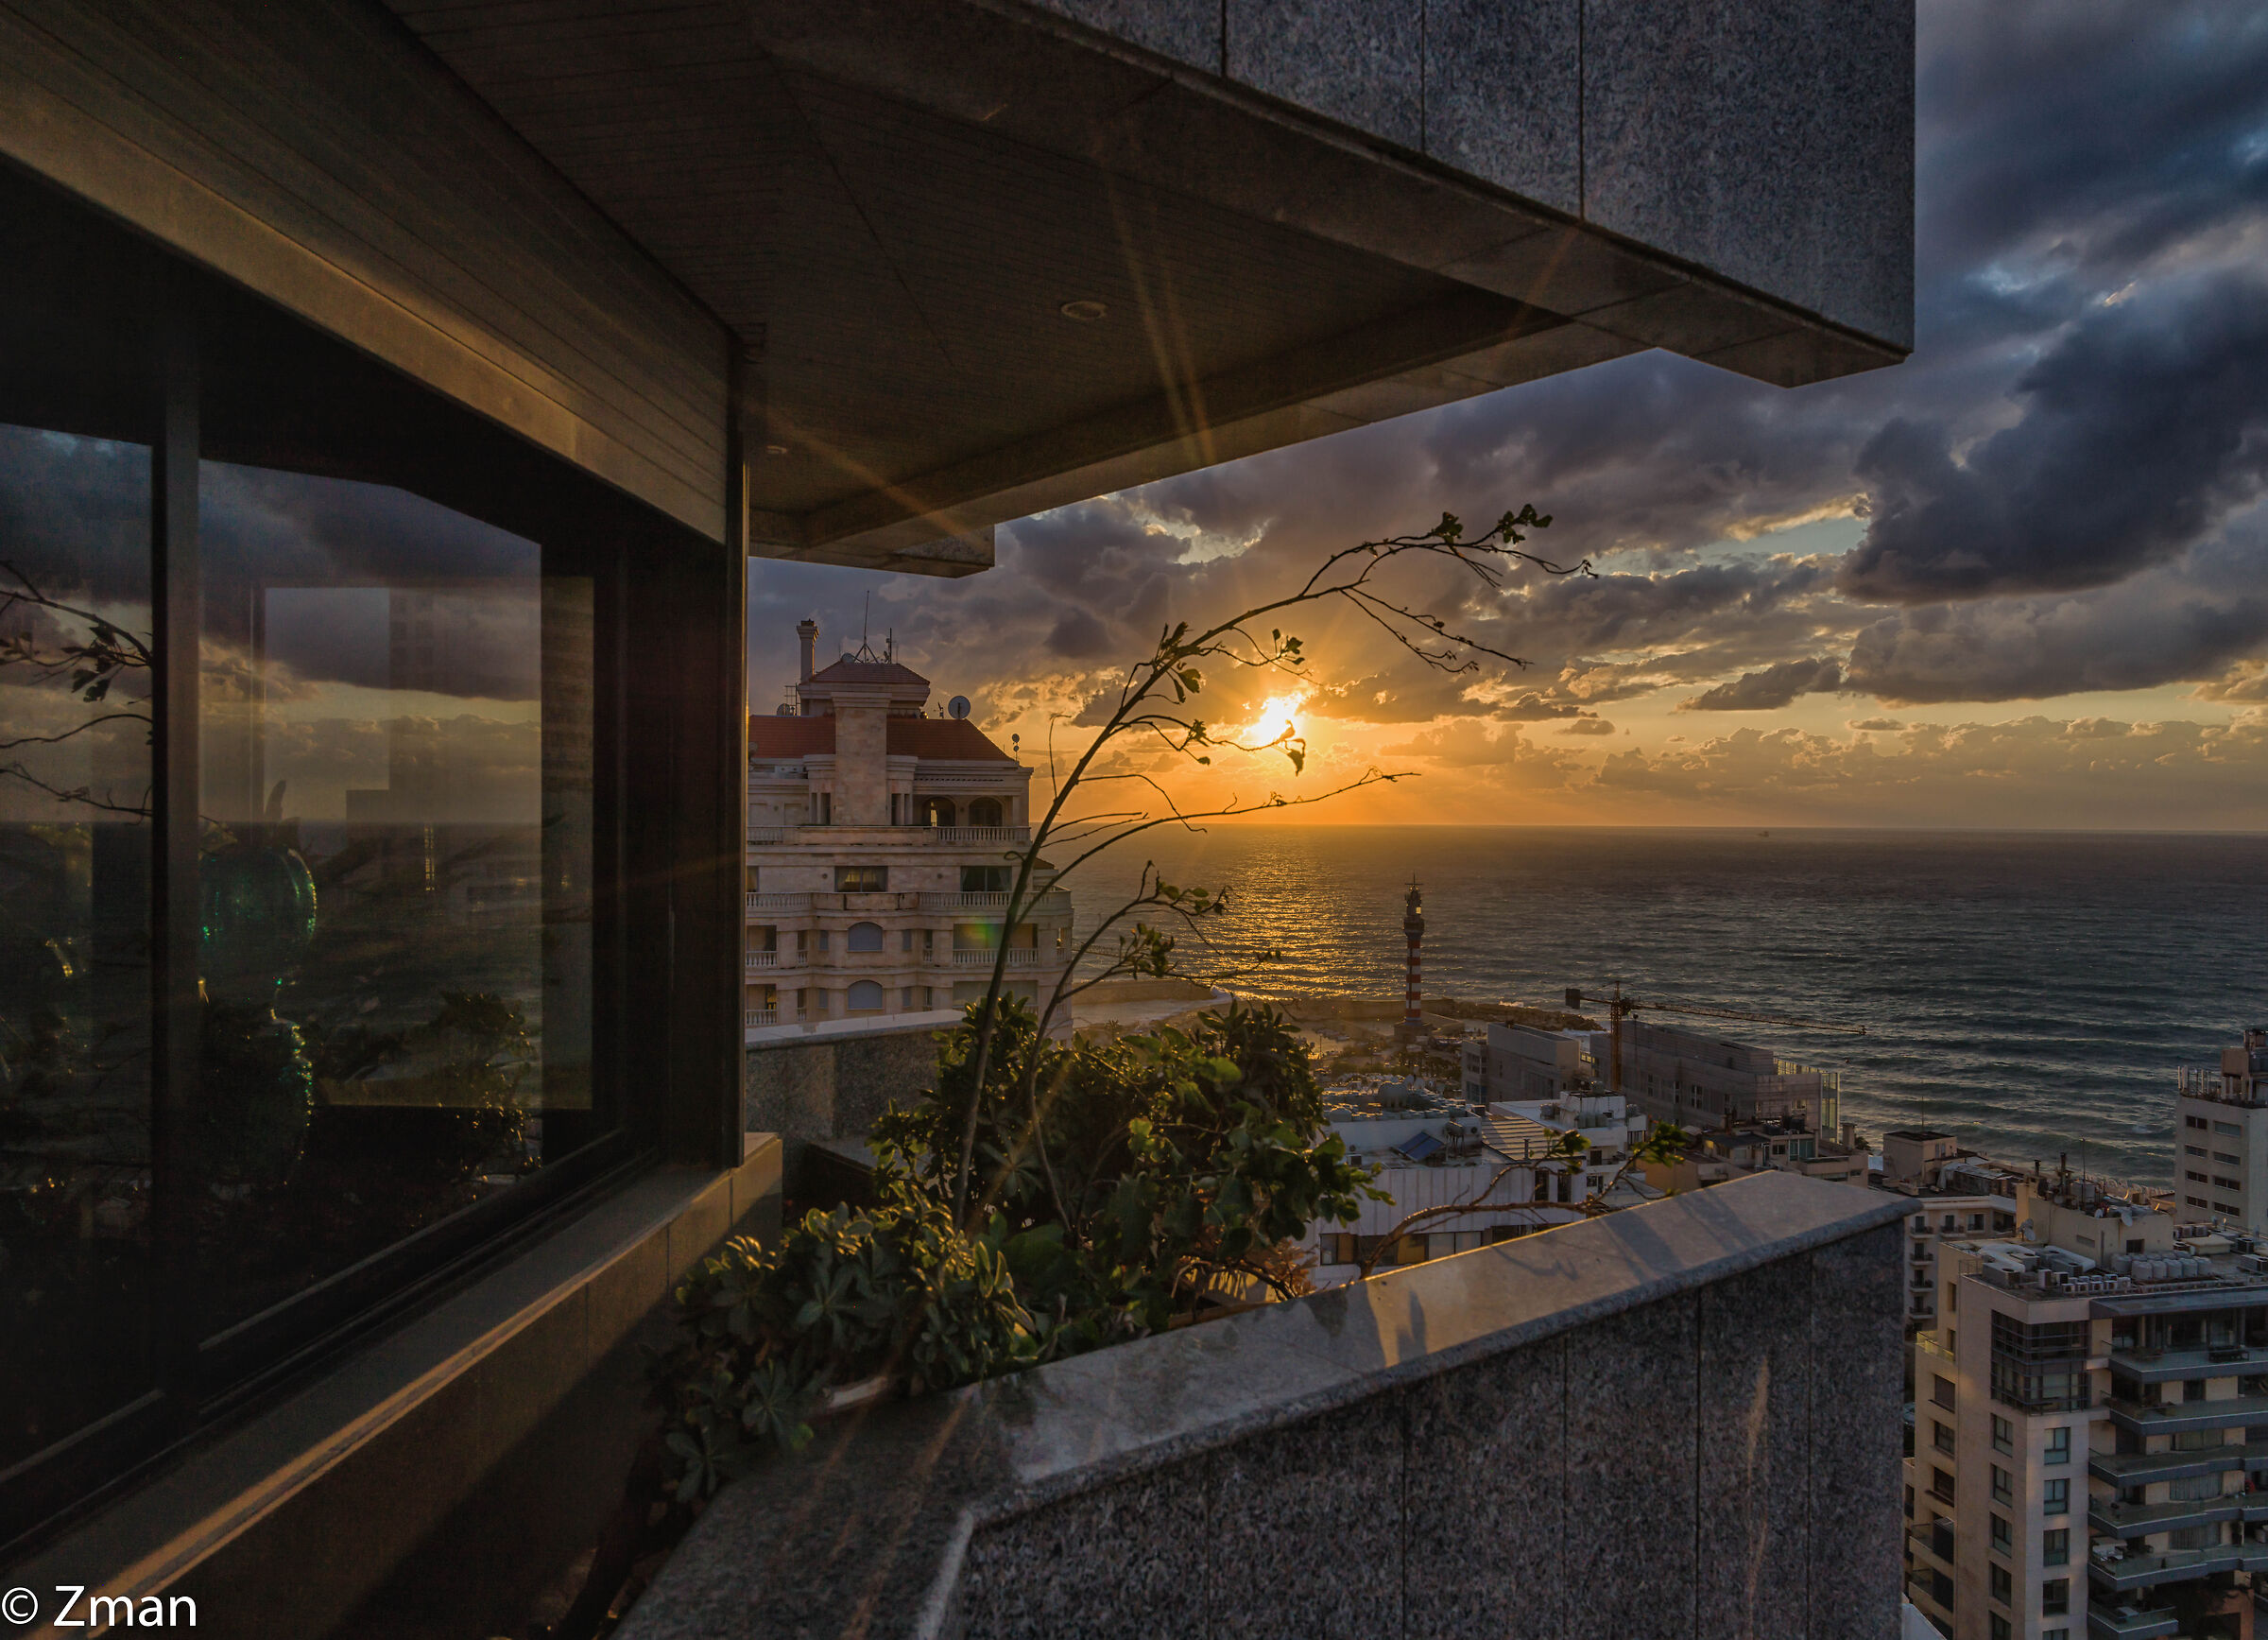 Sunset and The Balcony...